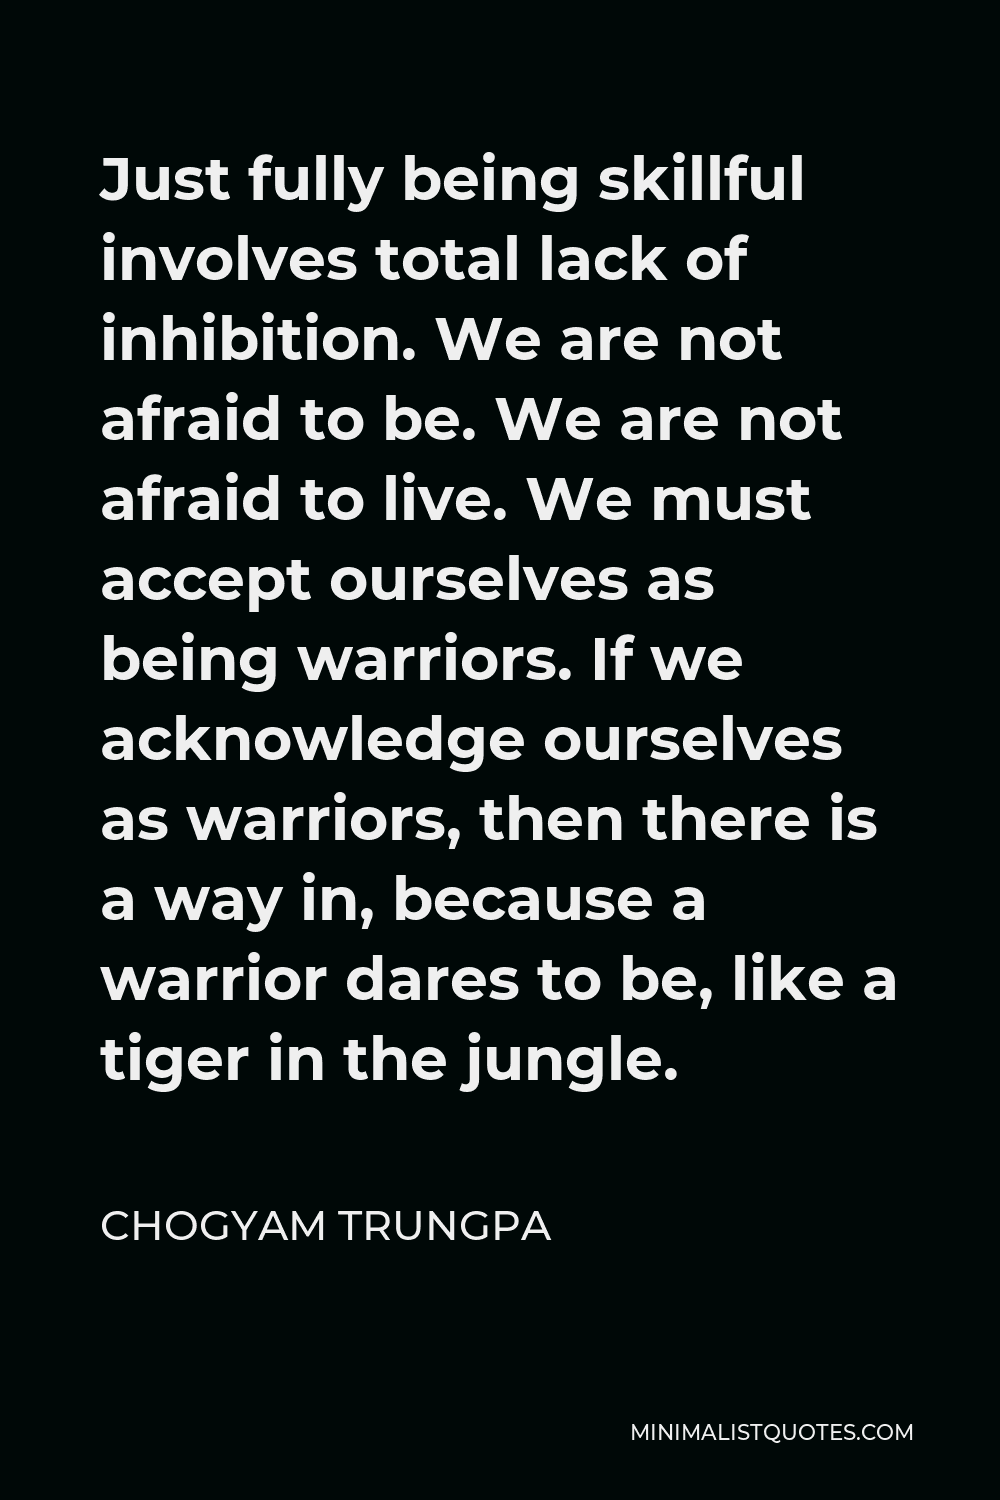 Chogyam Trungpa Quote - Just fully being skillful involves total lack of inhibition. We are not afraid to be. We are not afraid to live. We must accept ourselves as being warriors. If we acknowledge ourselves as warriors, then there is a way in, because a warrior dares to be, like a tiger in the jungle.